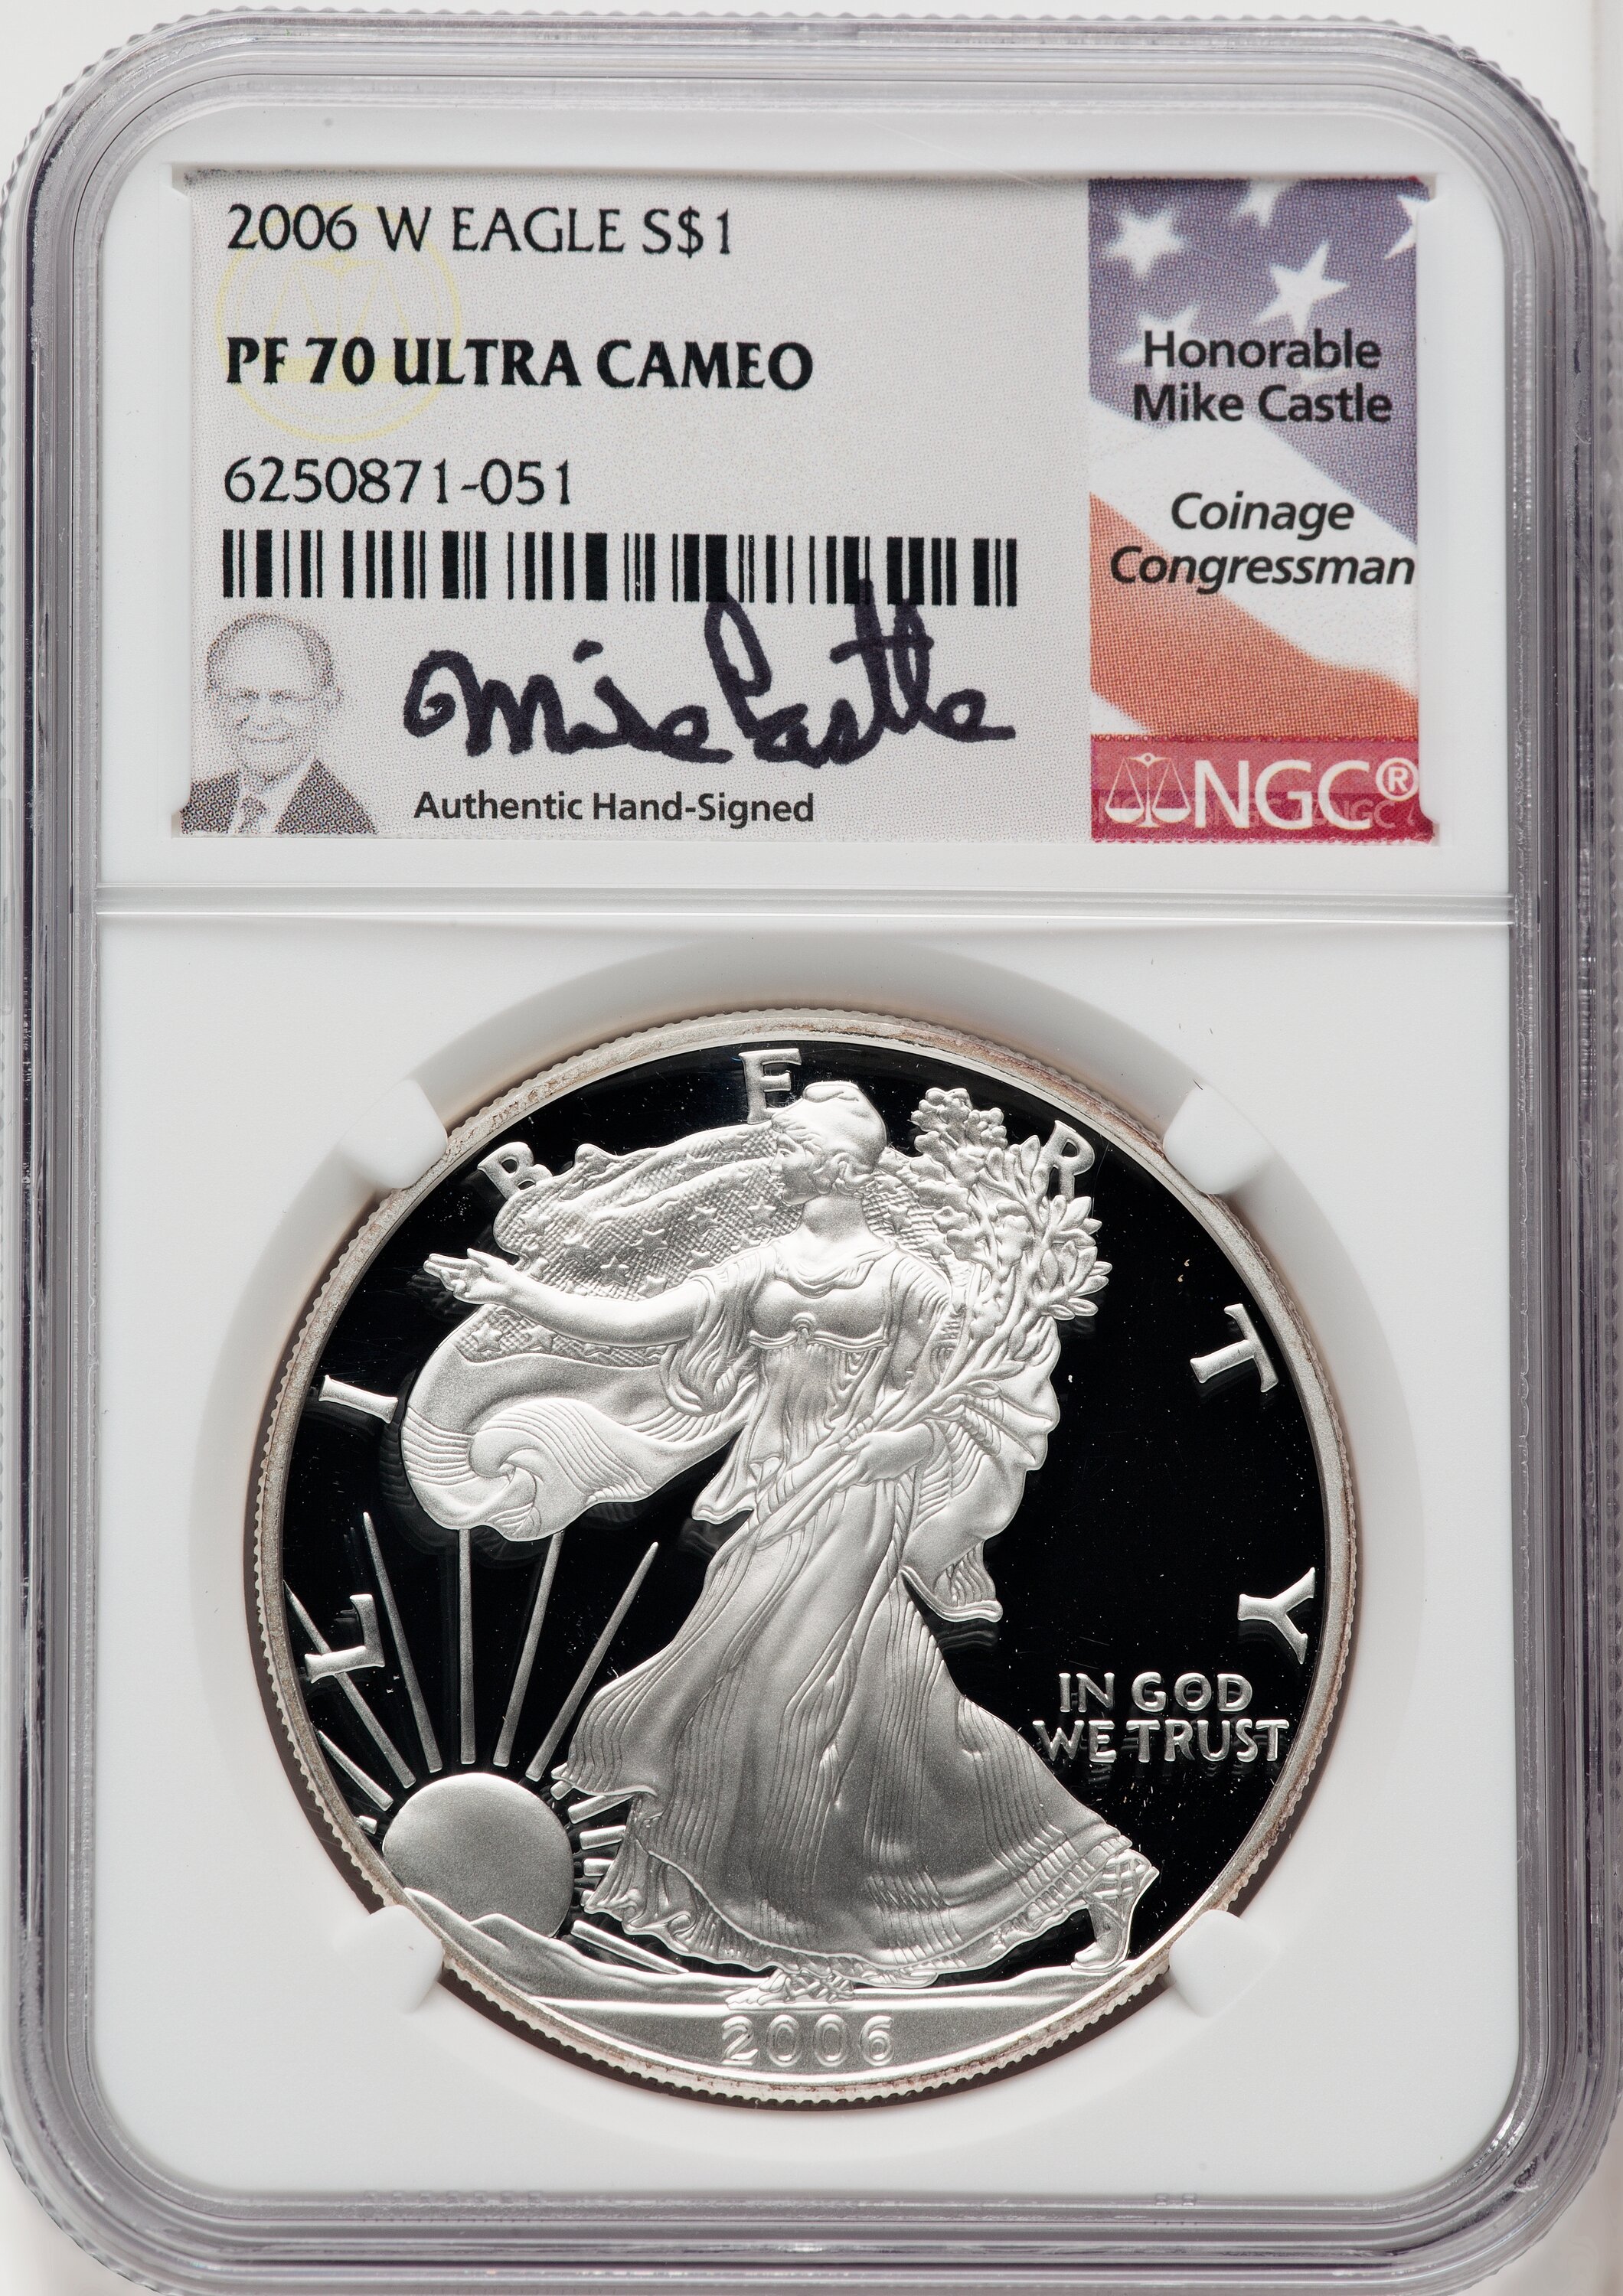 2006-W S$1 Silver Eagle, DC Mike Castle 70 NGC